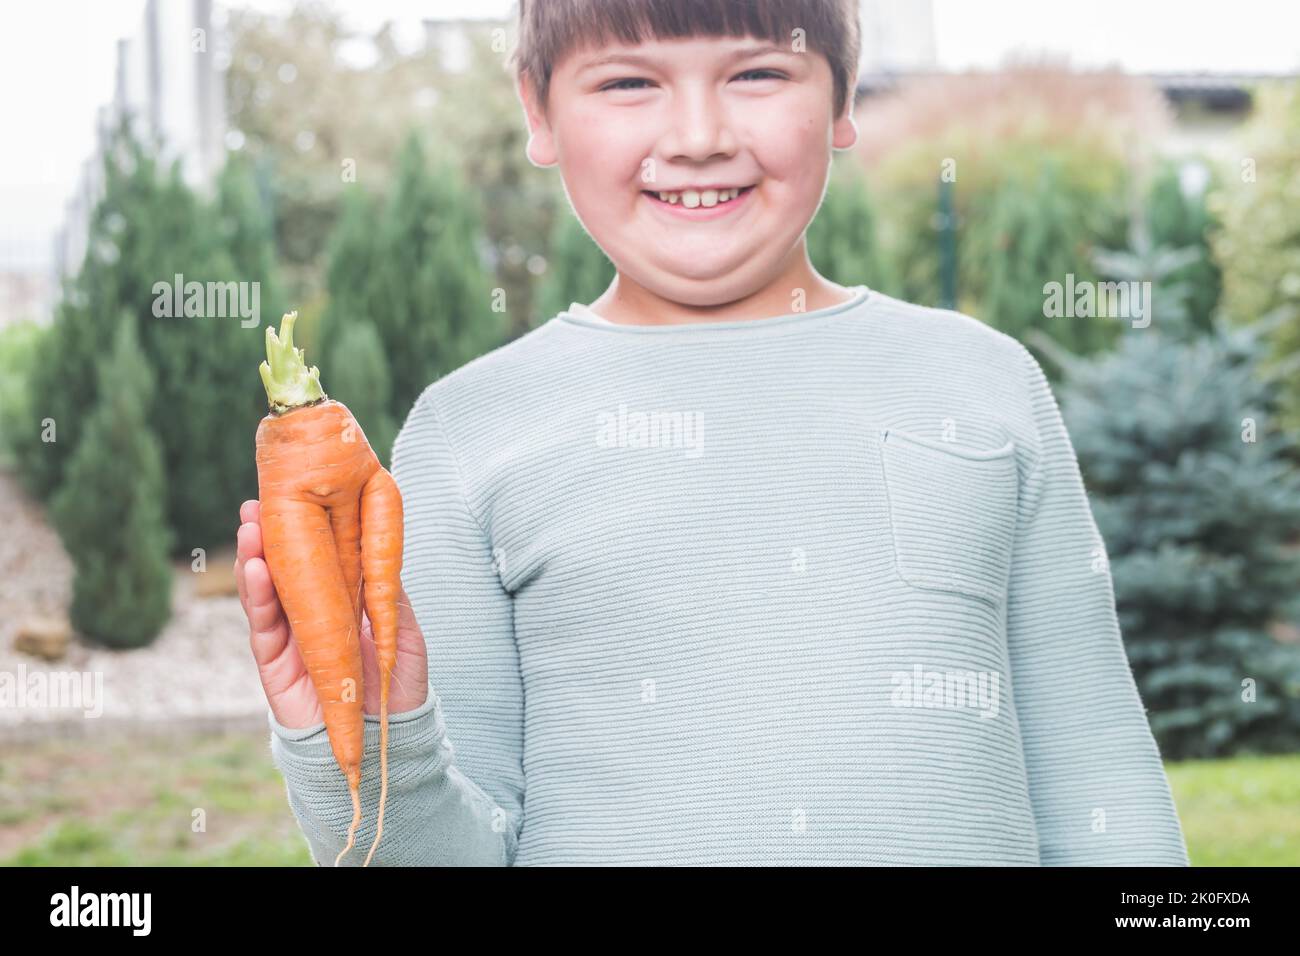 Smiling seven years old boy holding imperfect vegetable - carrot in hand. Child in the garden helps with gardening and harvesting. Boy face and smile. Stock Photo